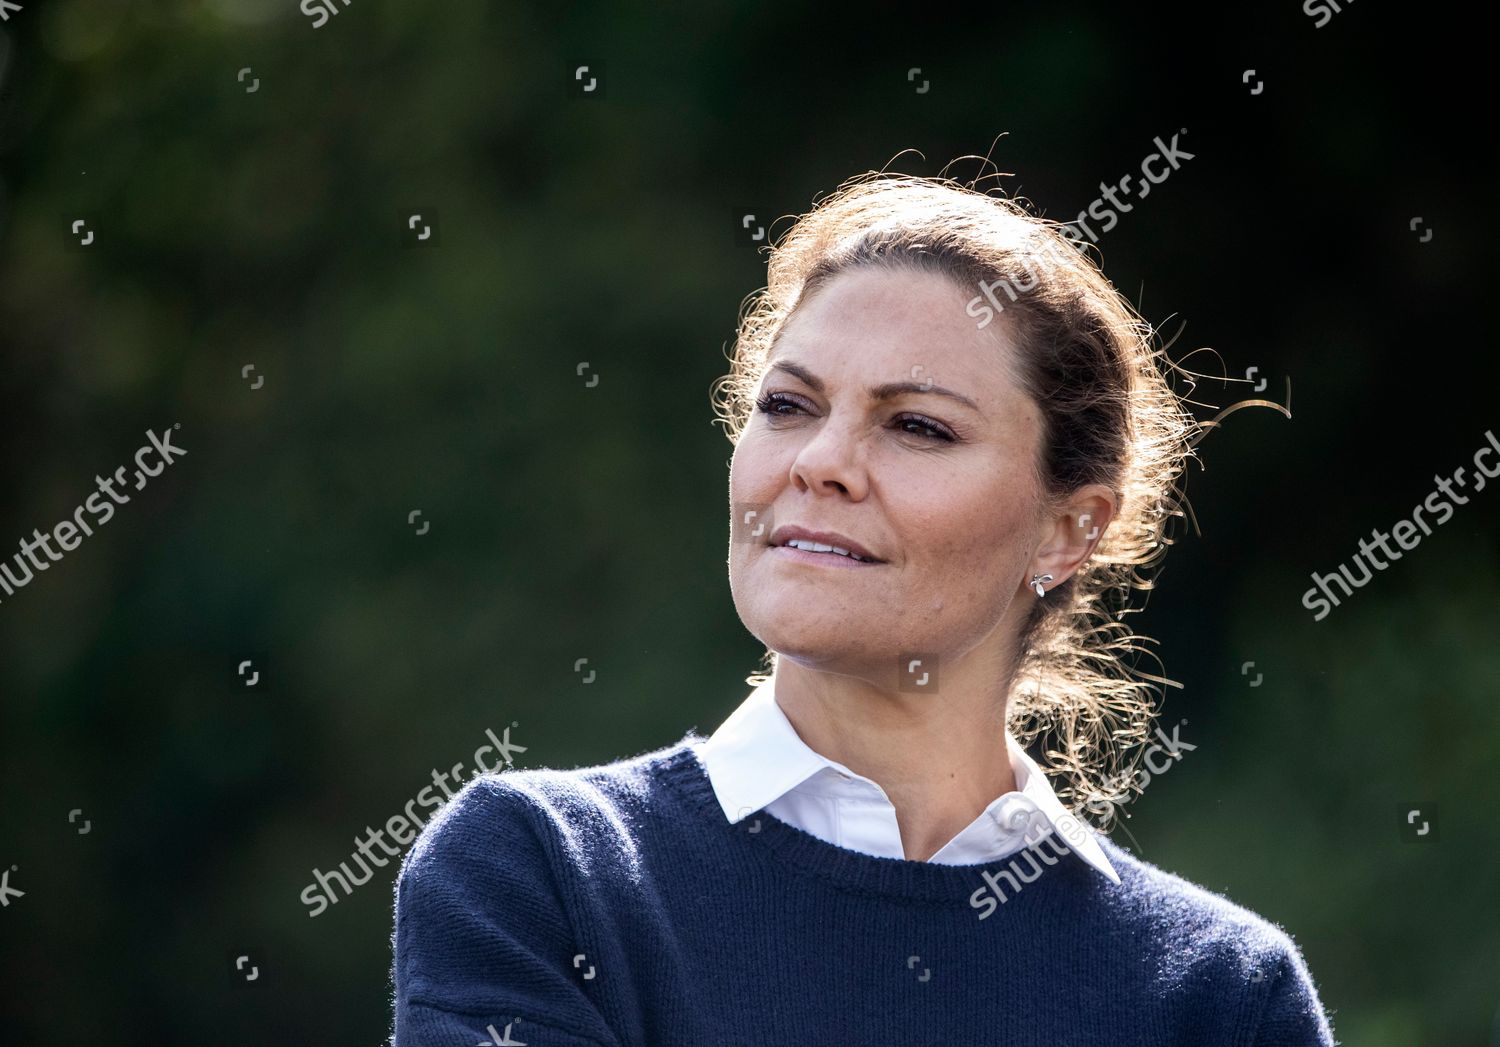 crown-princess-victoria-and-her-dog-rio-visit-alo-and-uto-sweden-shutterstock-editorial-12361980an.jpg